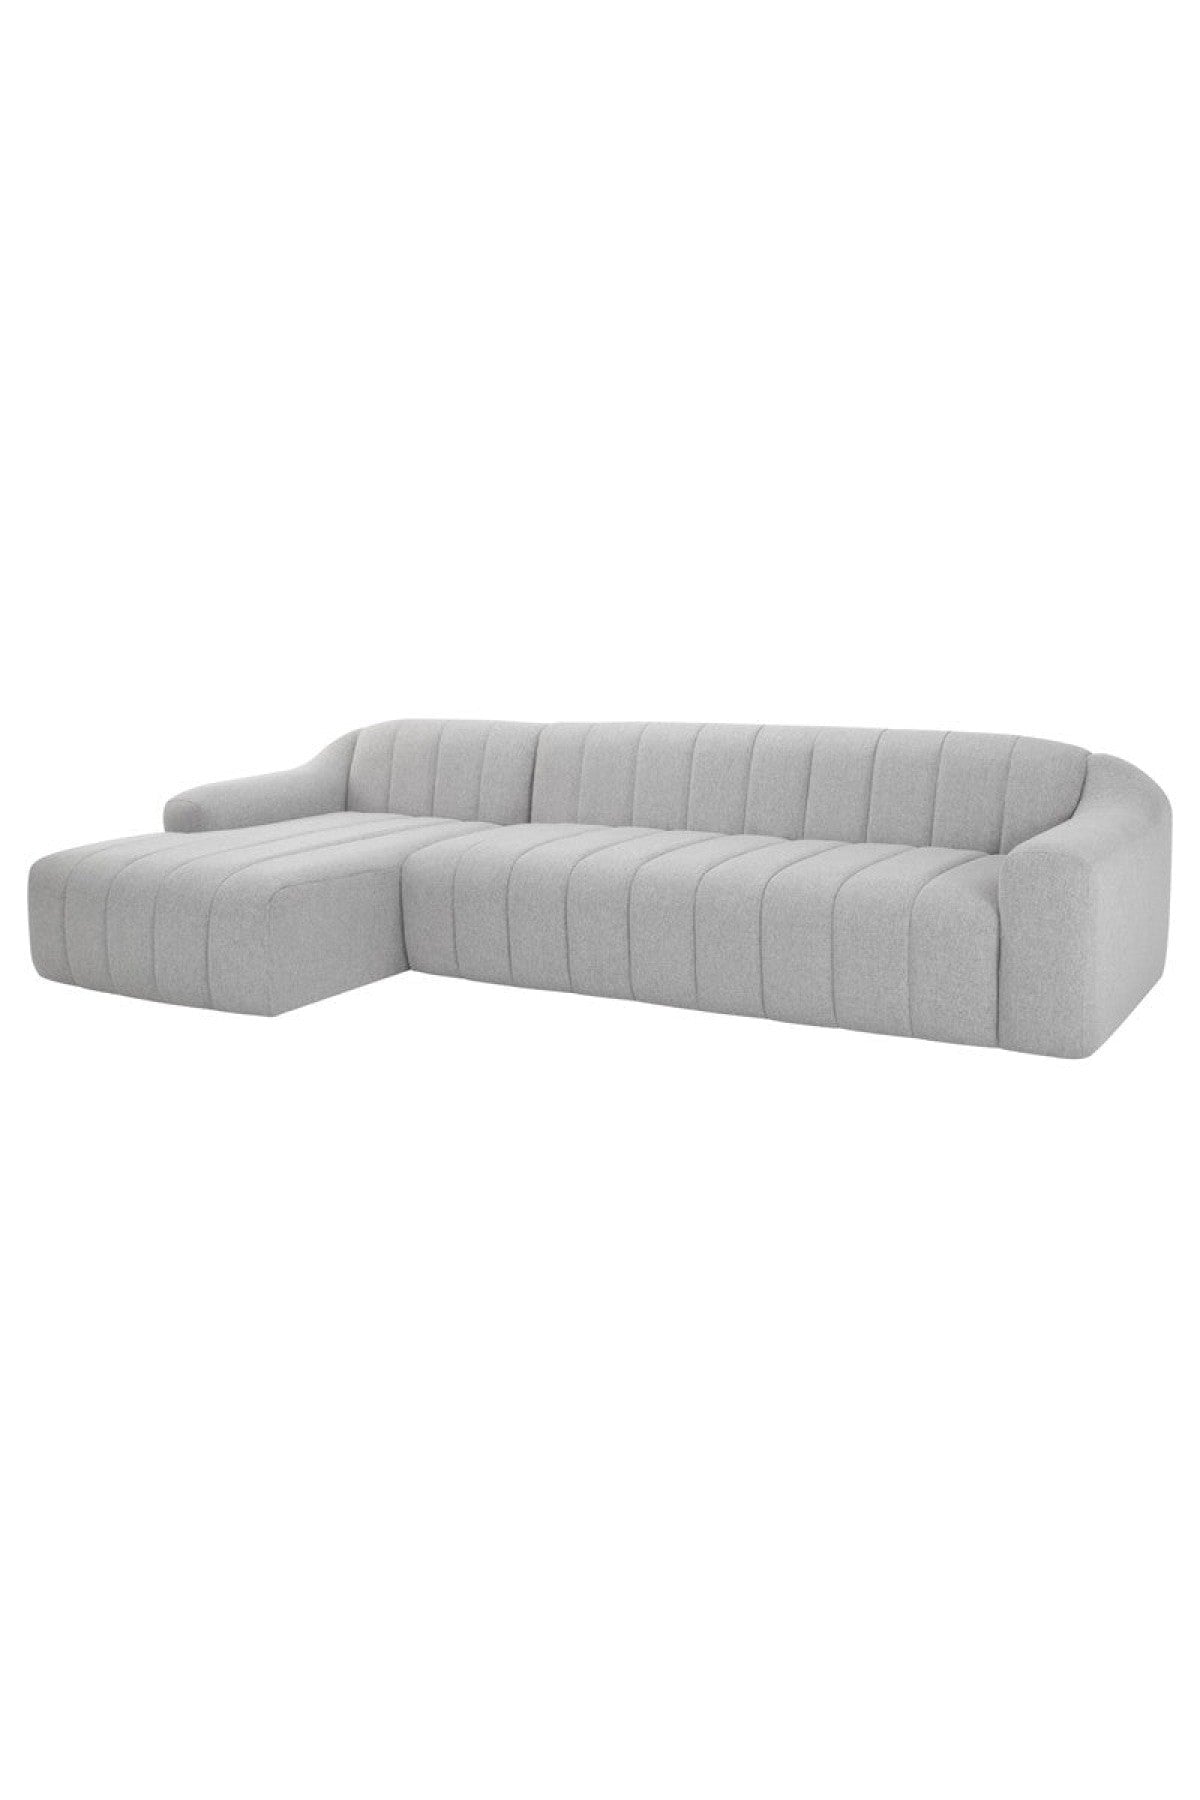 Coraline Sectional